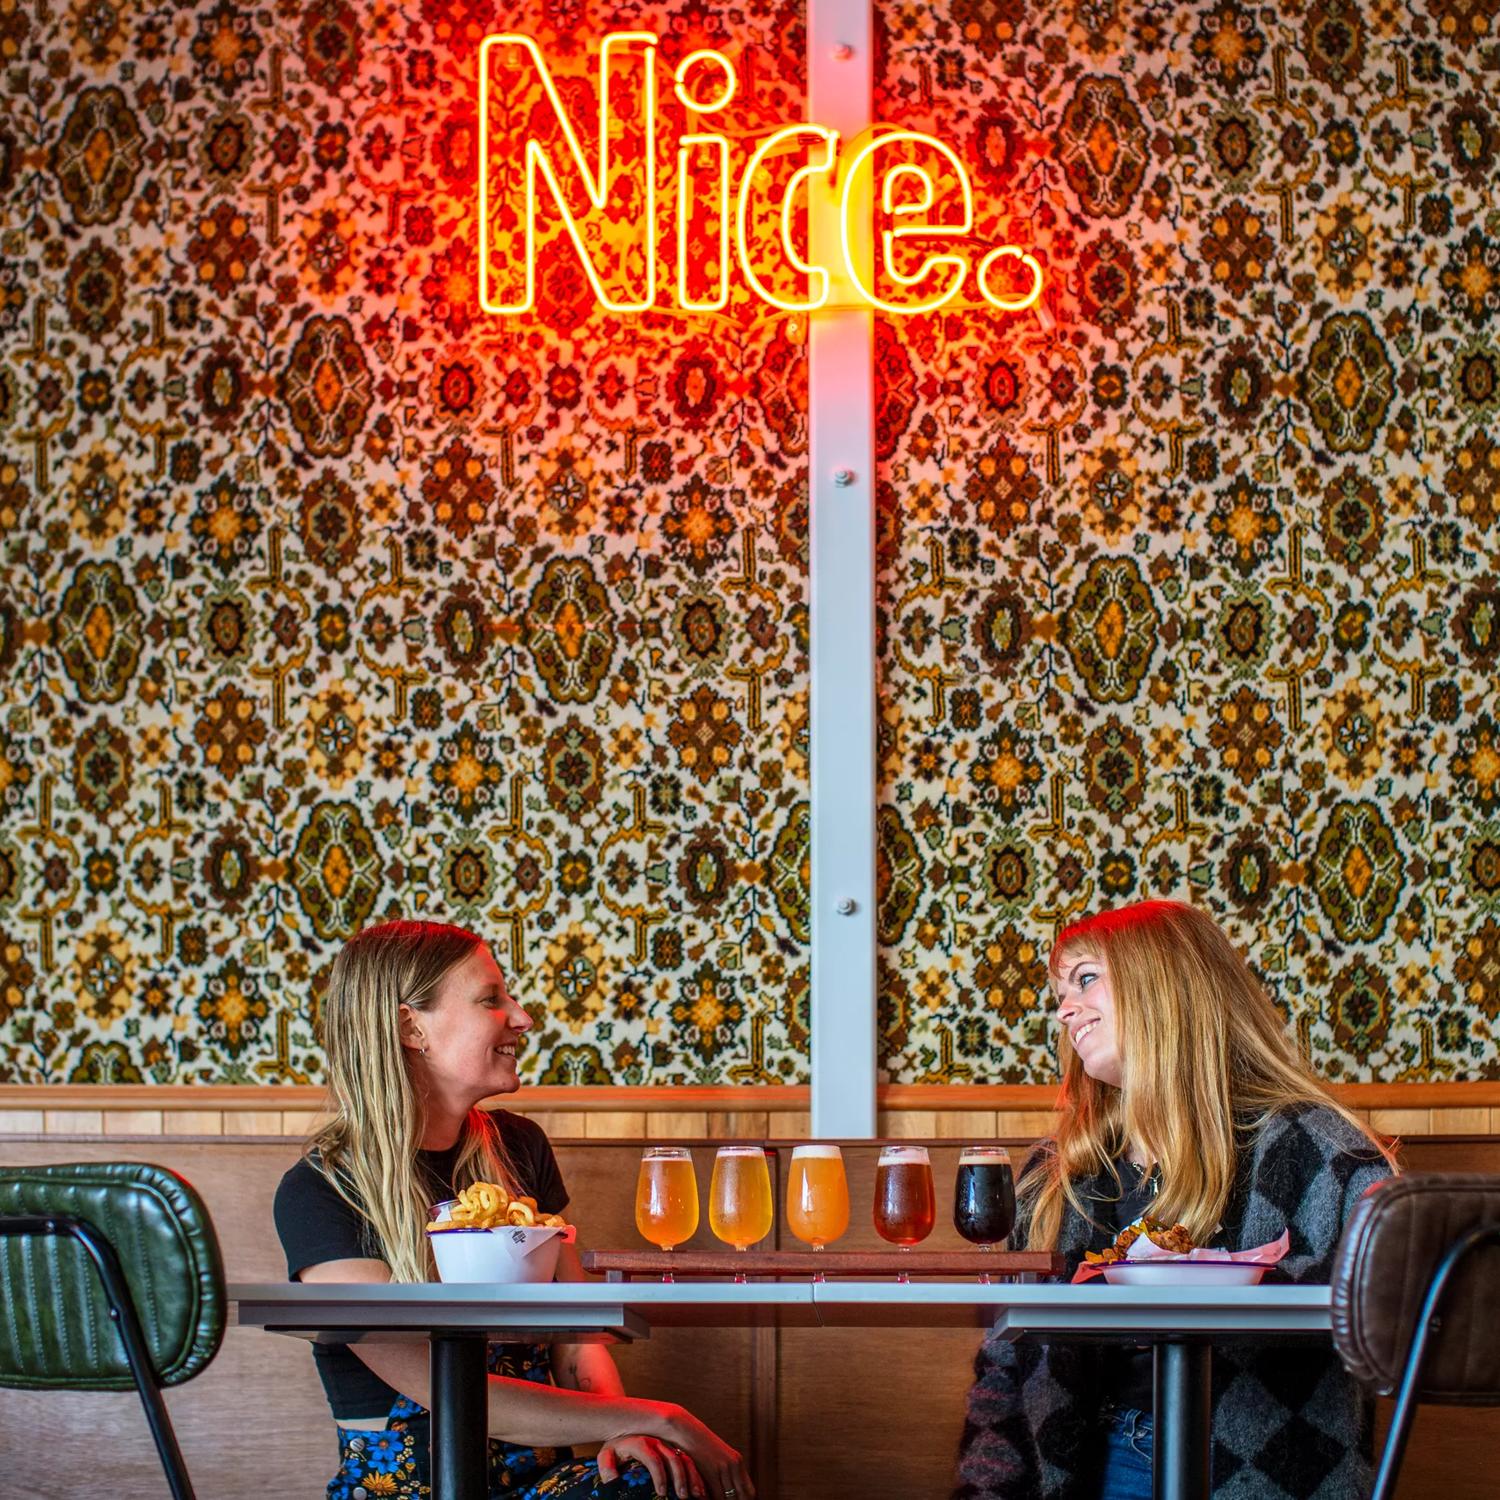 2 poeple share a beer tasting tray at Parrotdog Bar, with an Led sign above them that says Nice.